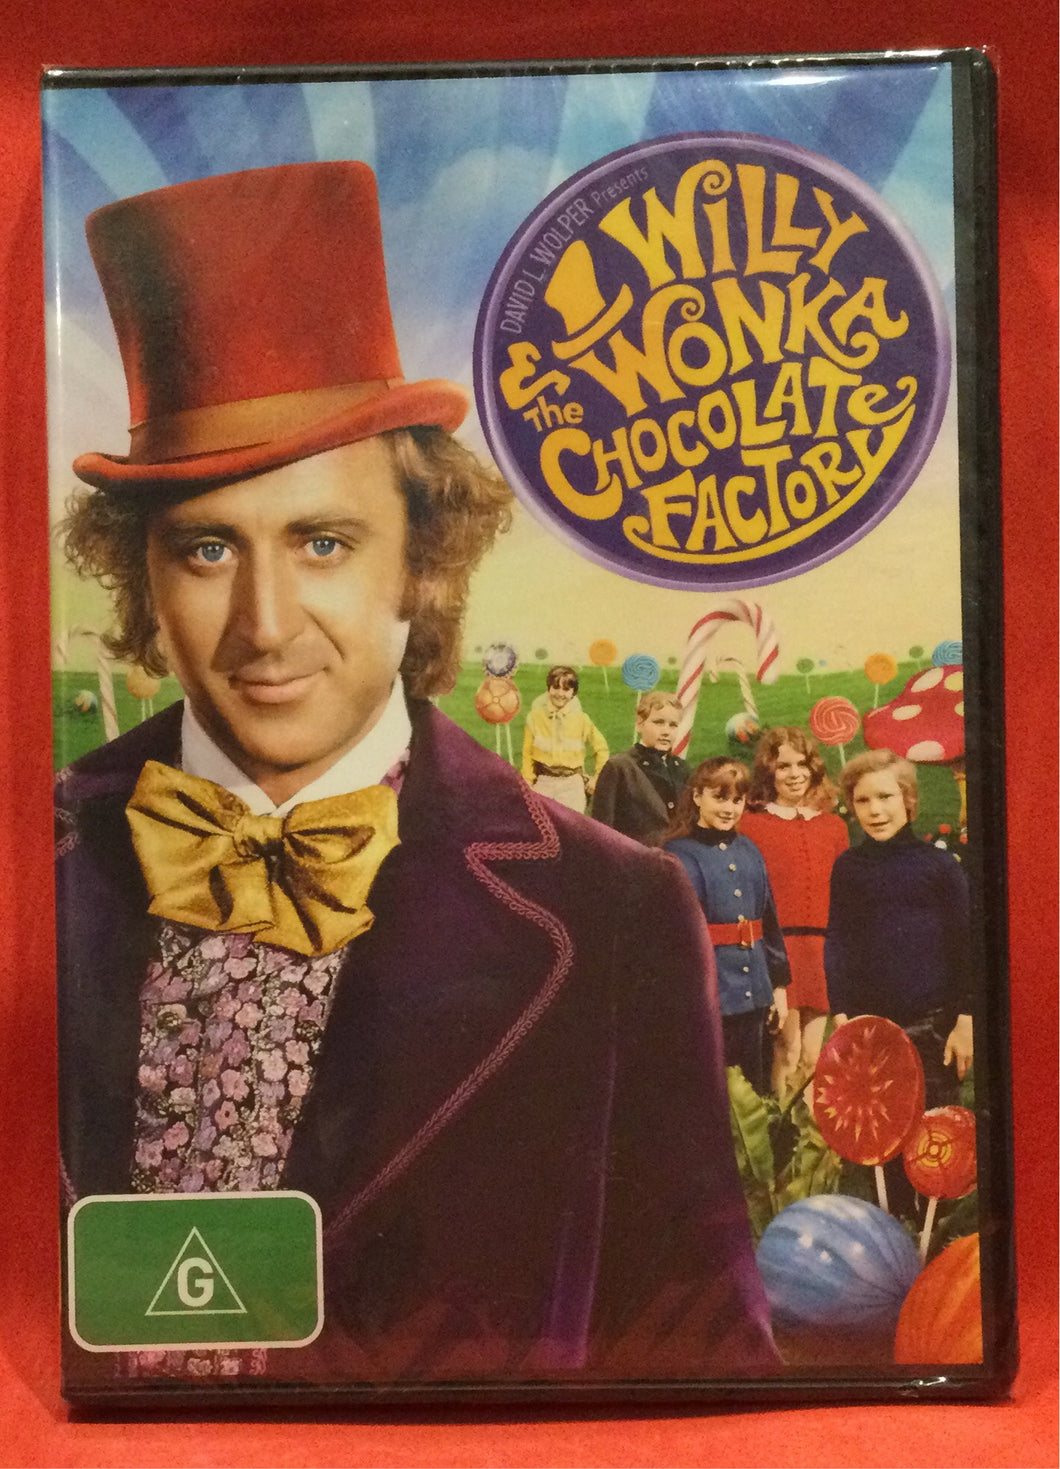 WILLY WONKA AND THE CHOCOLATE FACTORY - DVD (SEALED)